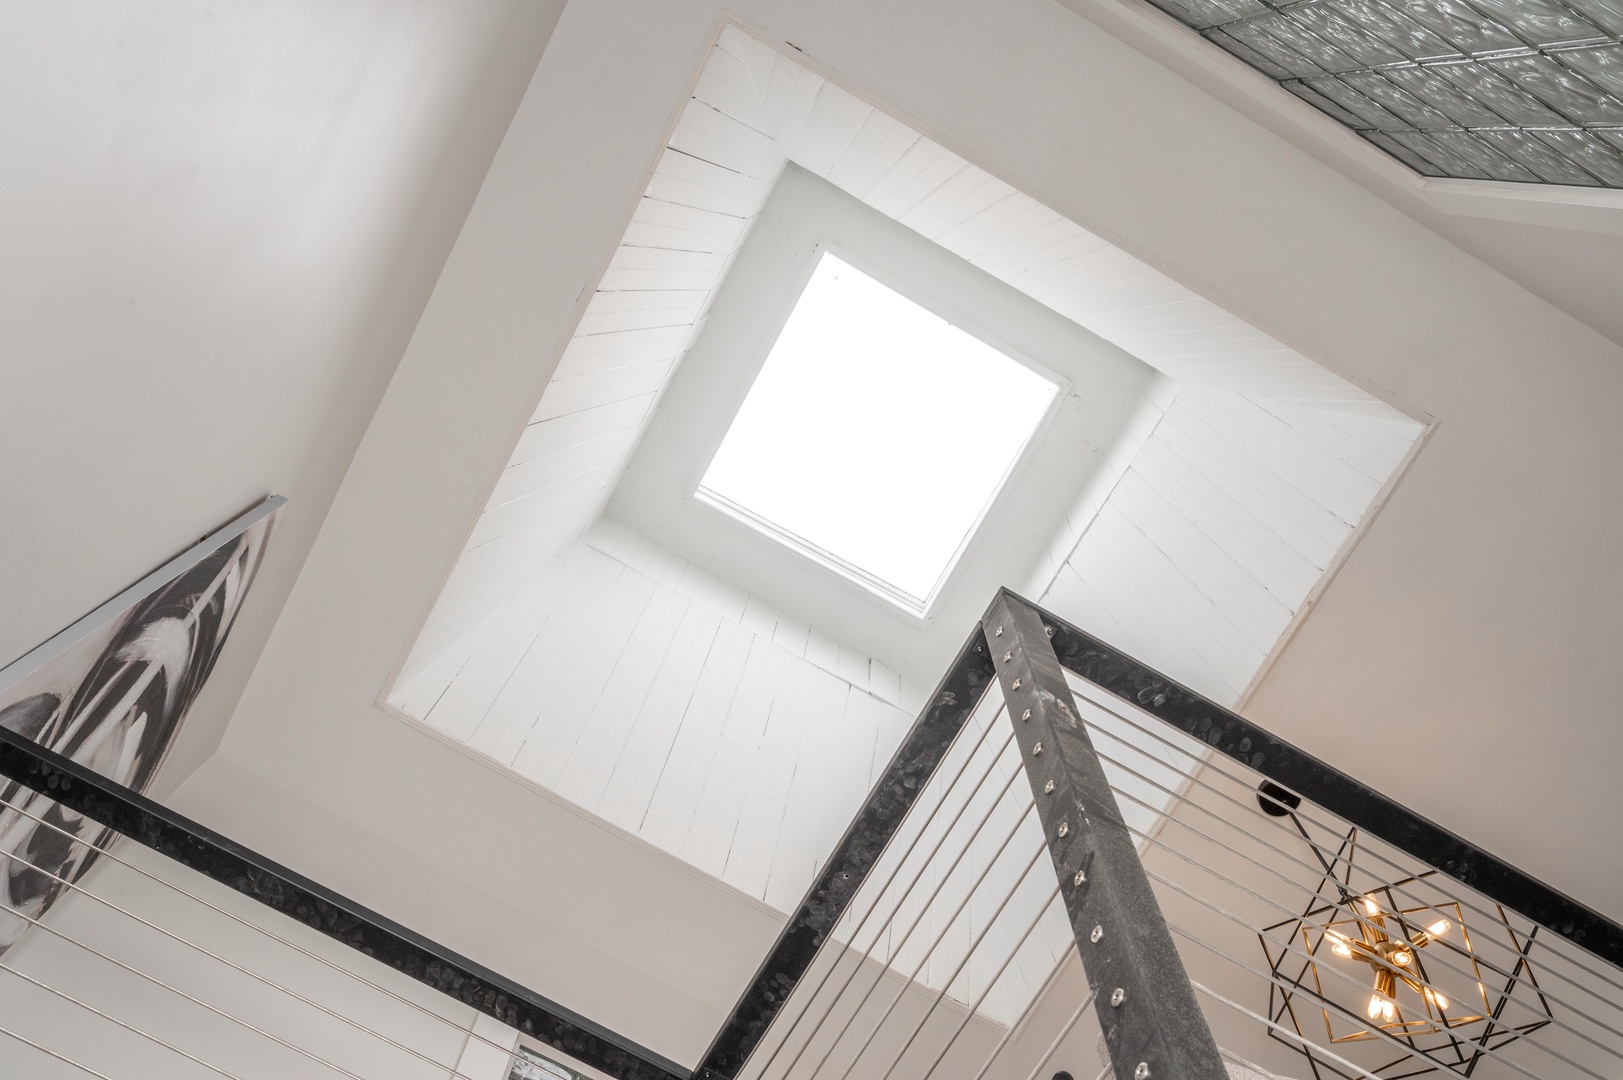 Enjoy the soaring ceilings & wide skylight in the building stairwell